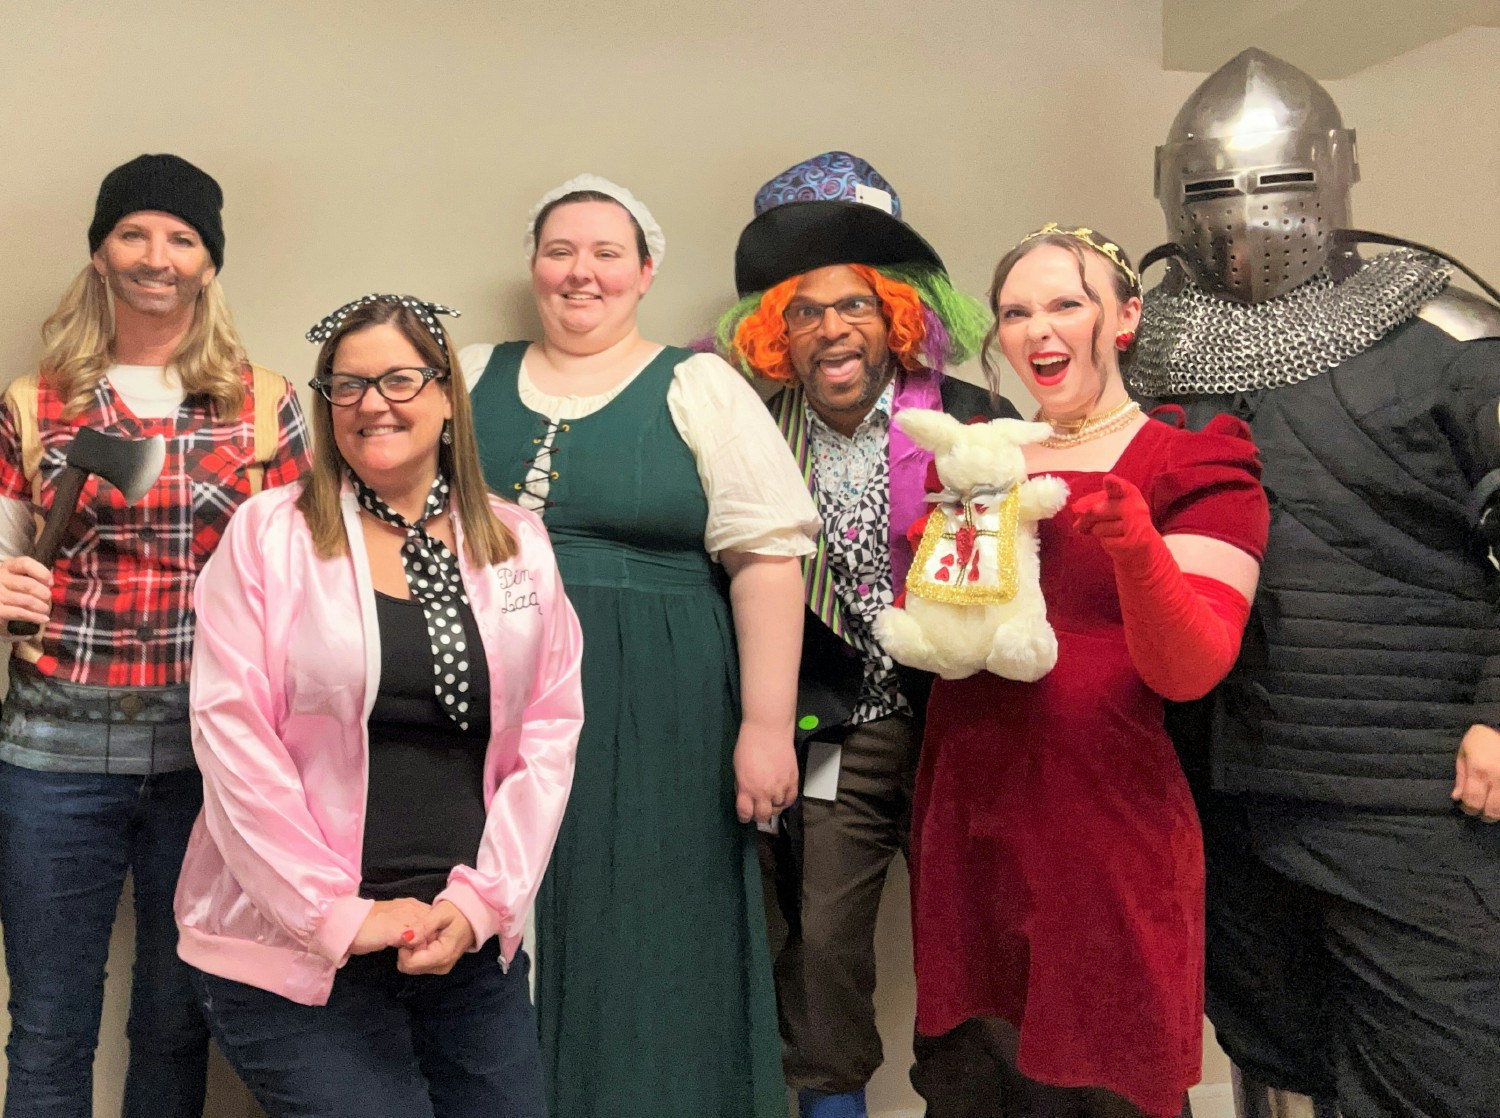 Never a dull moment when our employees find an excuse to dress up! Halloween is no exception.